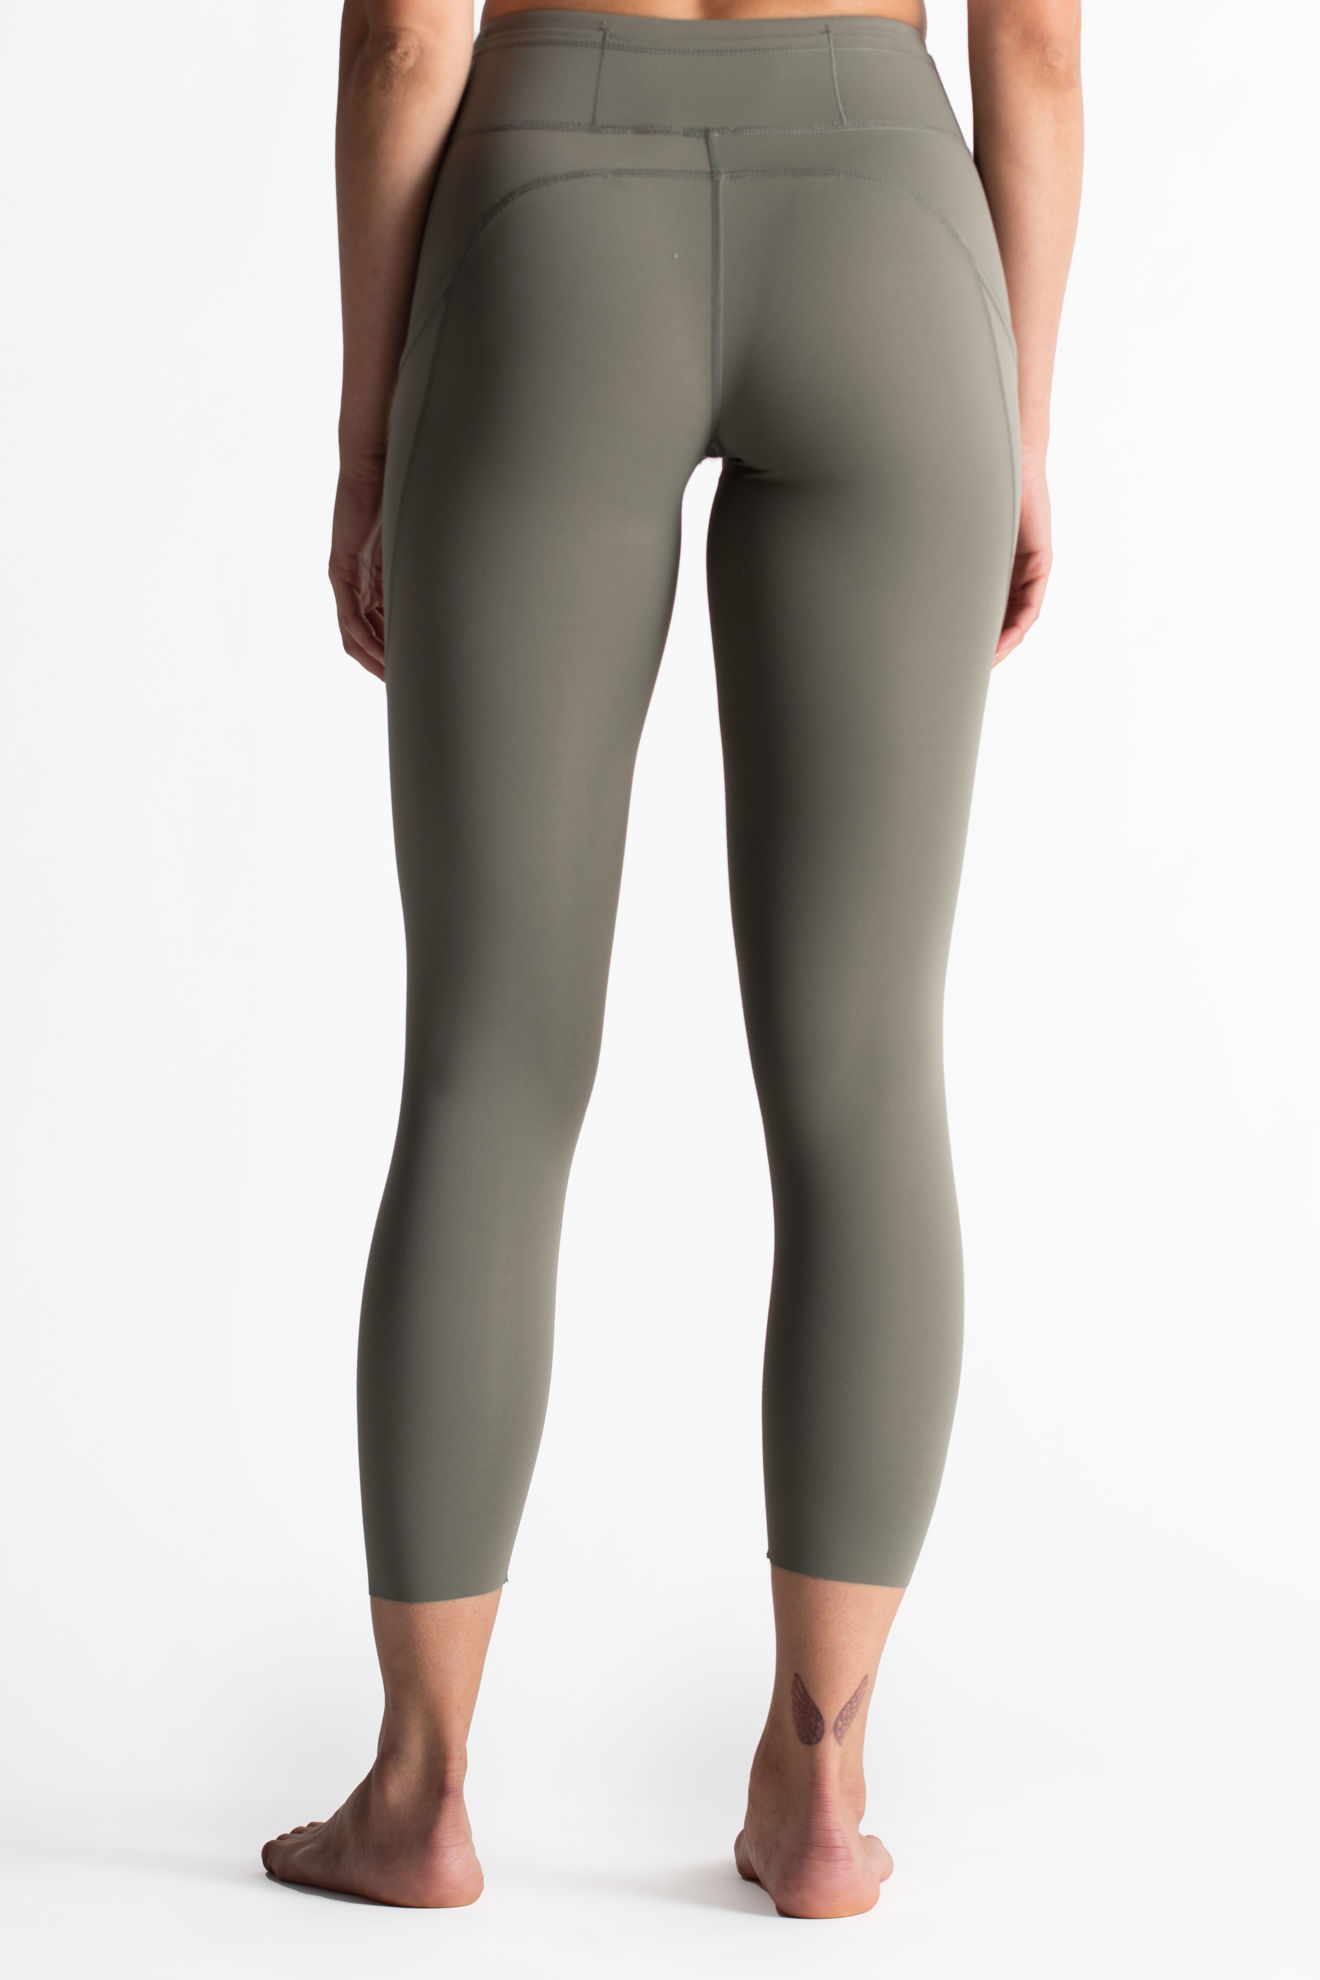 Picture of Fluxxe Dull Green Legging